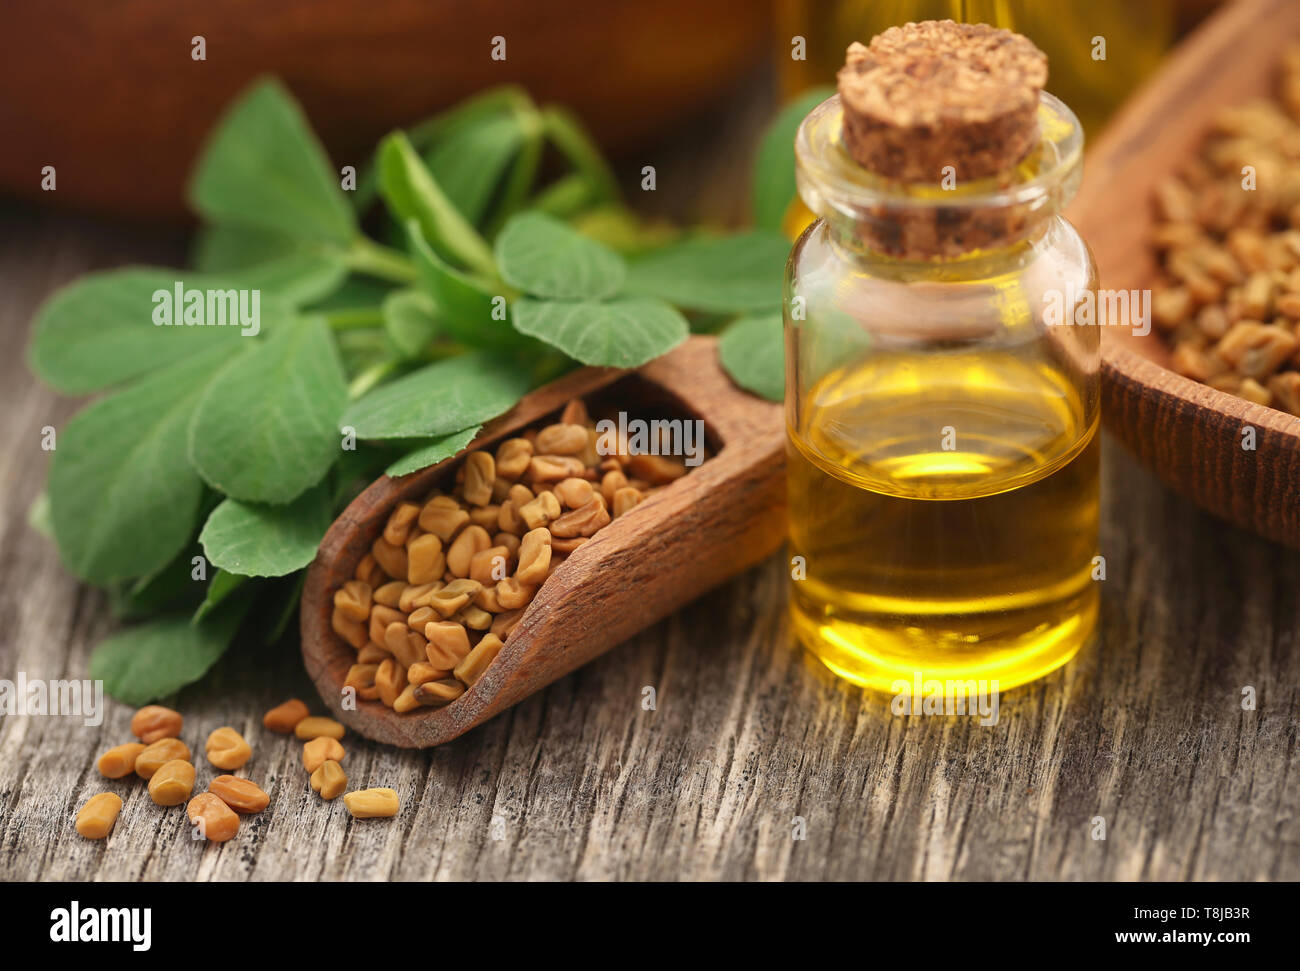 Fenugreek seeds with oil in bottle on wooden background Stock Photo